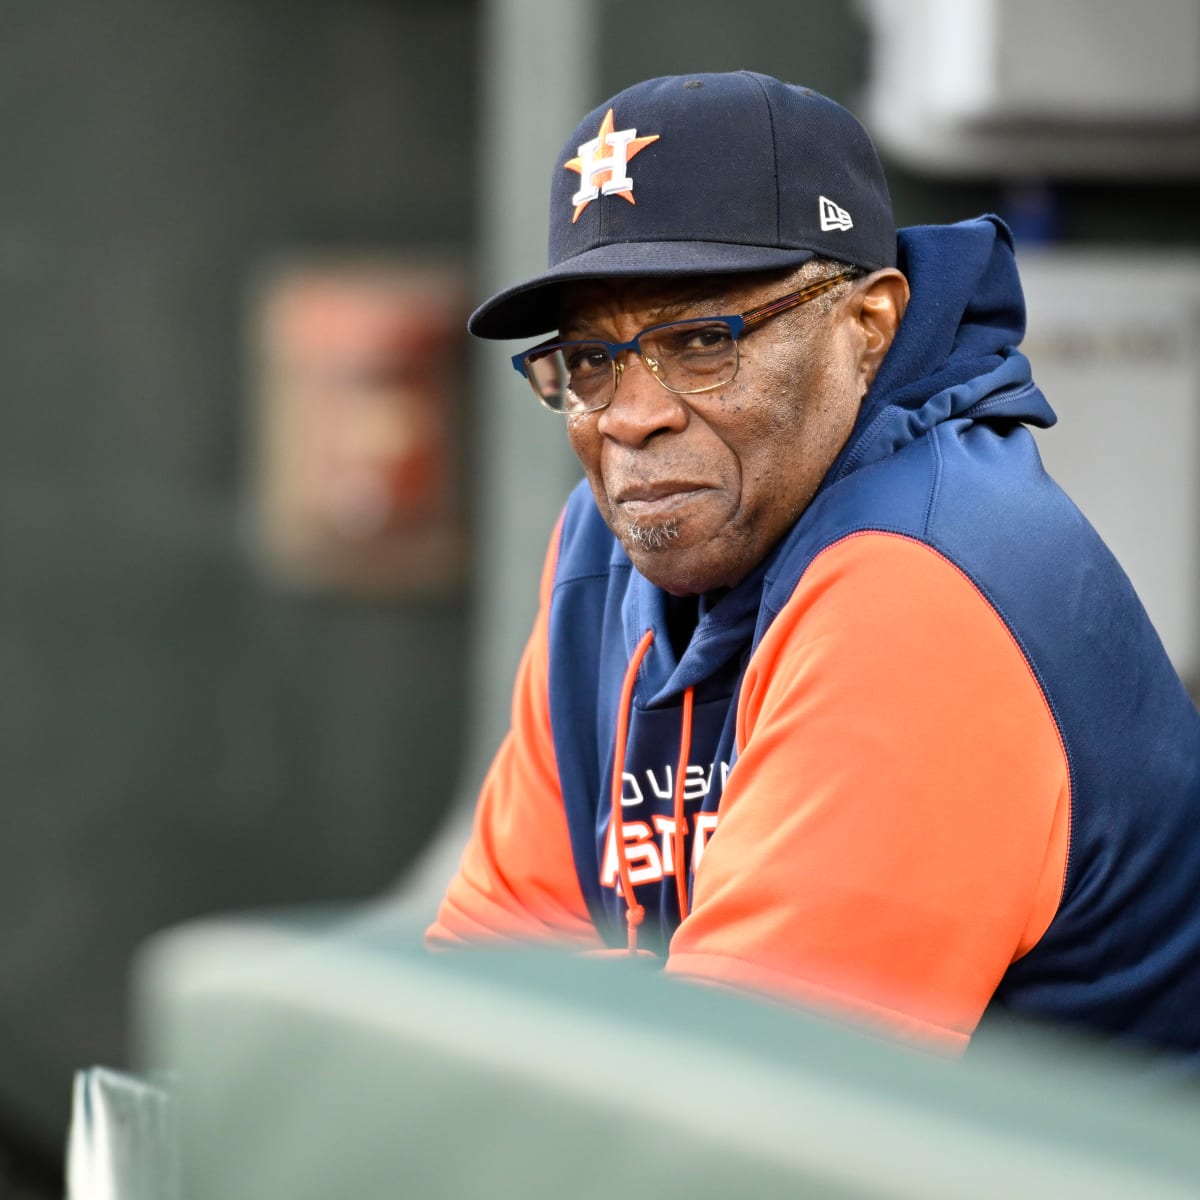 Suit yourself: Houston Astros manager Dusty Baker buys new threads for All- Star coaches